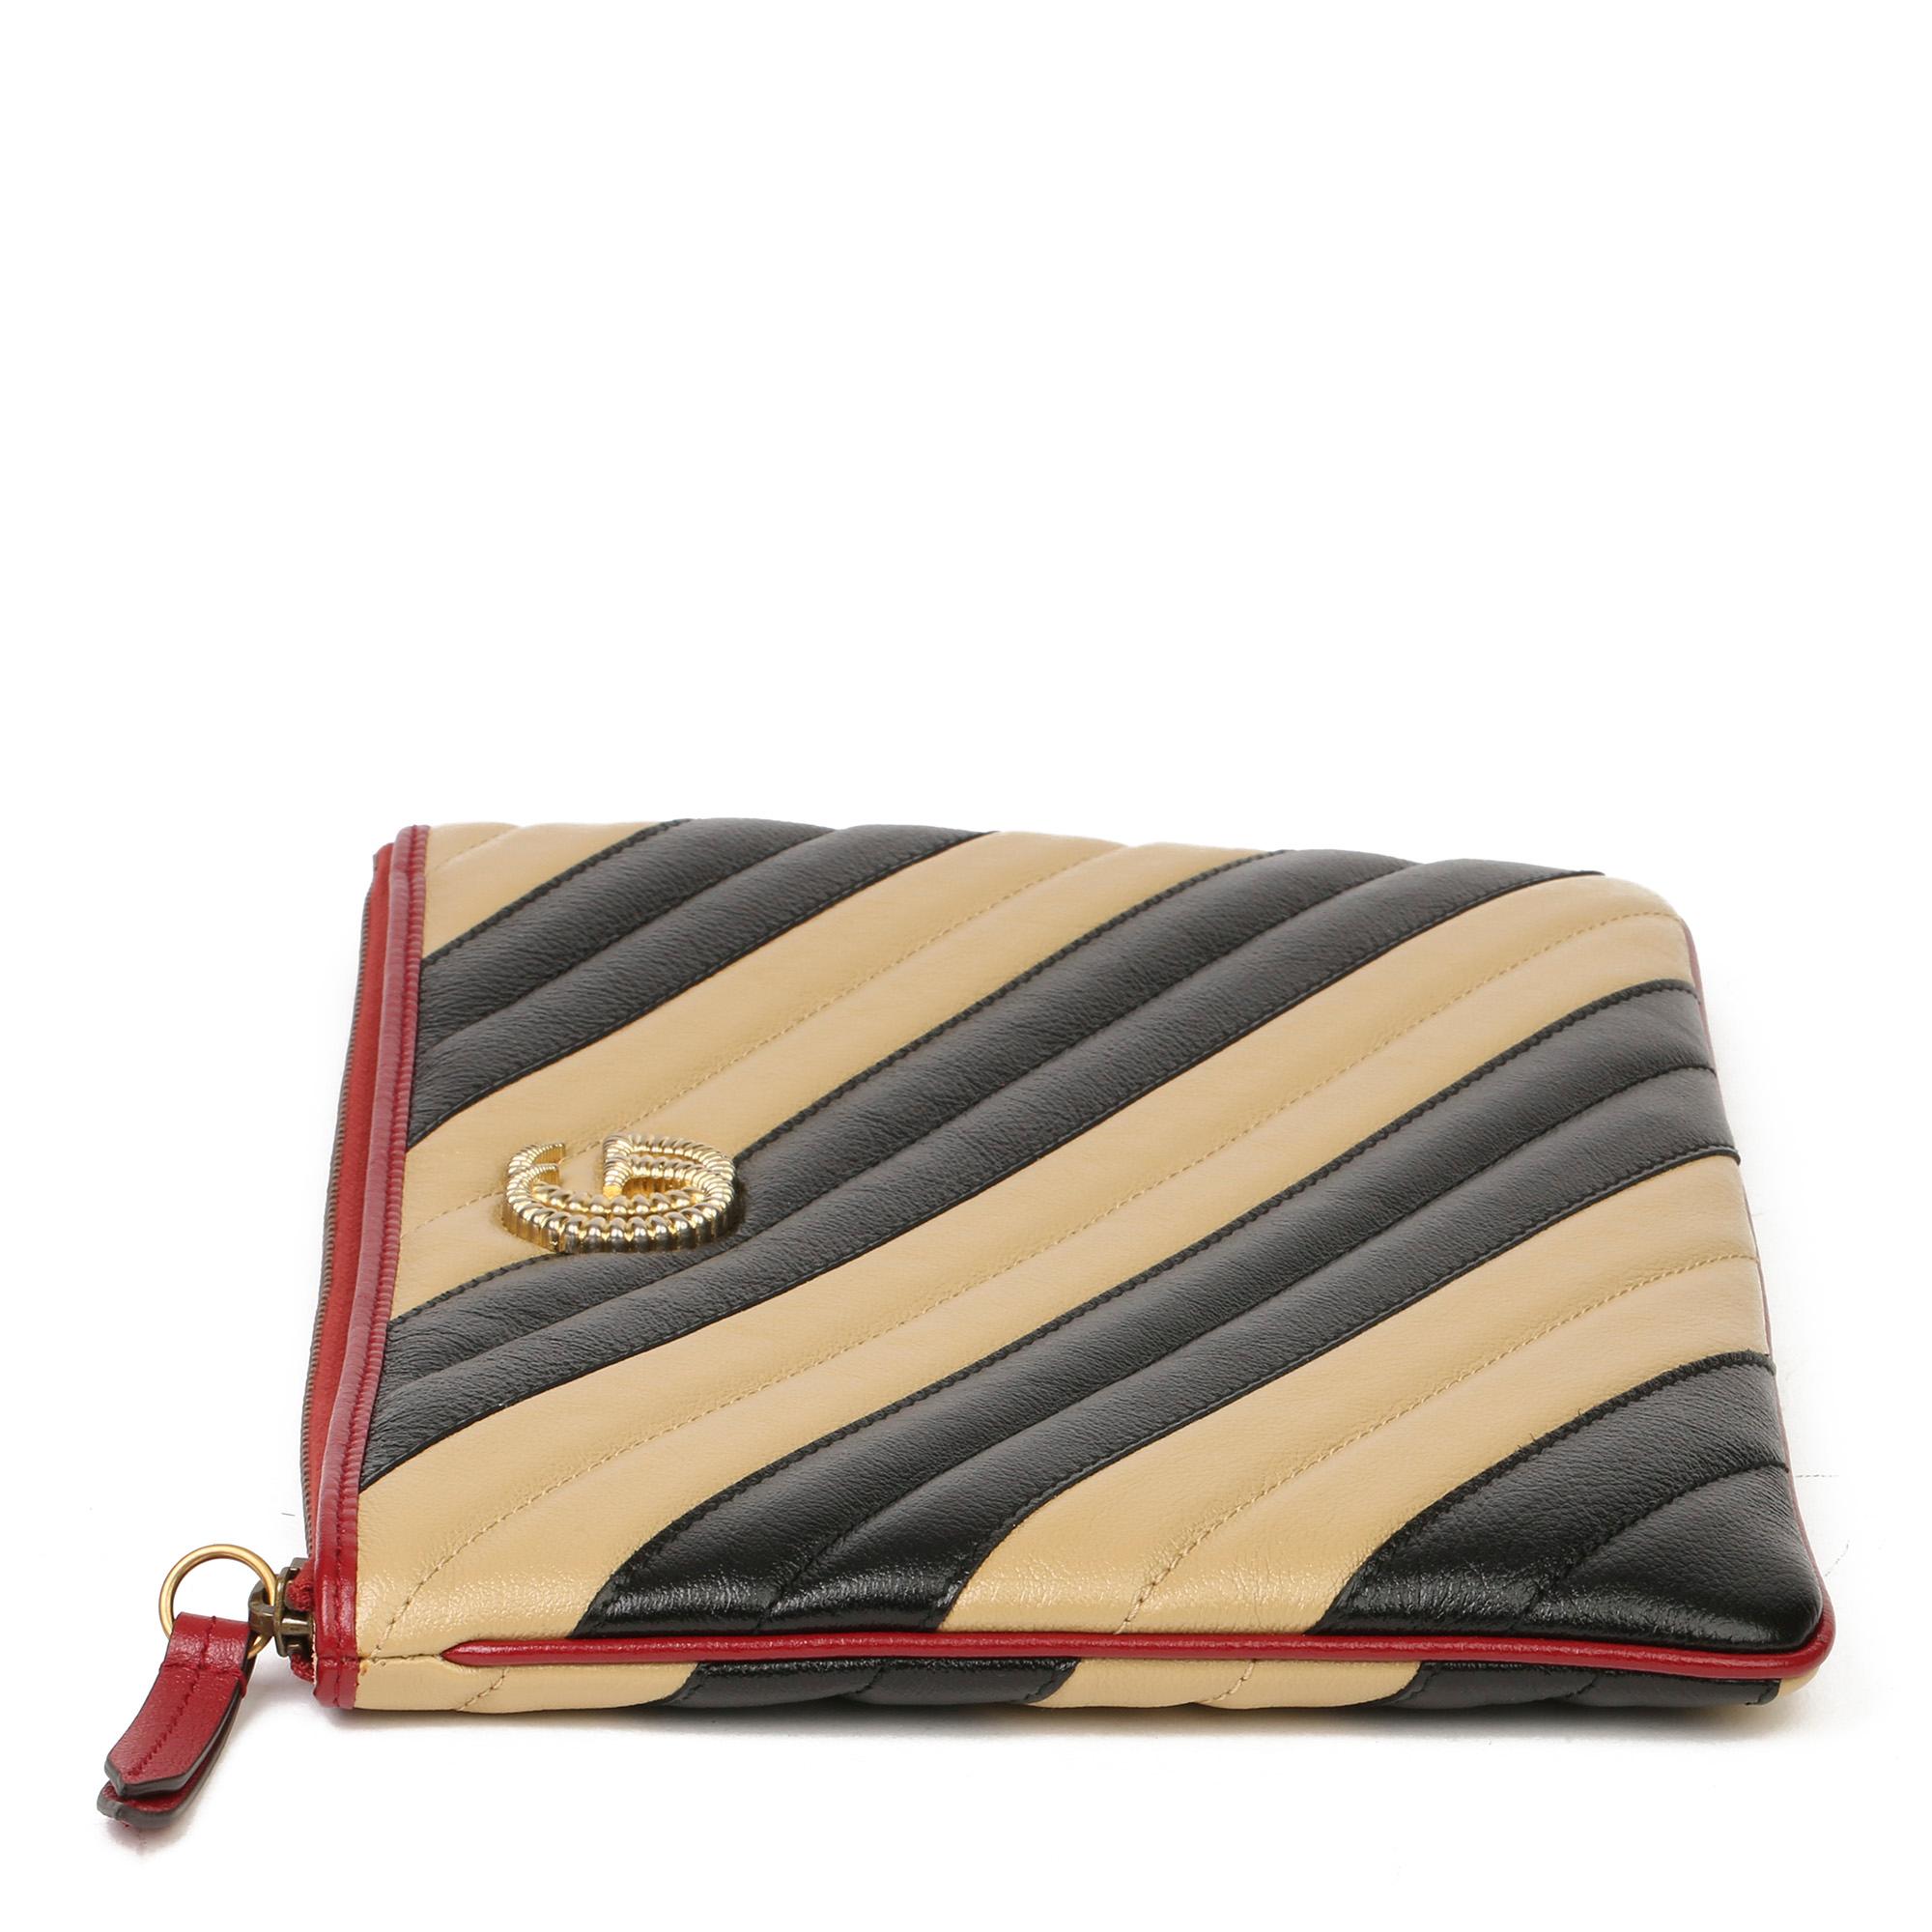 GUCCI
Black, Cream & Red Diagonal Quilted Aged Calfskin Leather Marmont Pouch

Xupes Reference: HB3708
Serial Number: 573814 562600
Age (Circa): 2020
Accompanied By: Gucci Dust Bag, Box, Care Booklet
Authenticity Details: Serial Stamp (Made in